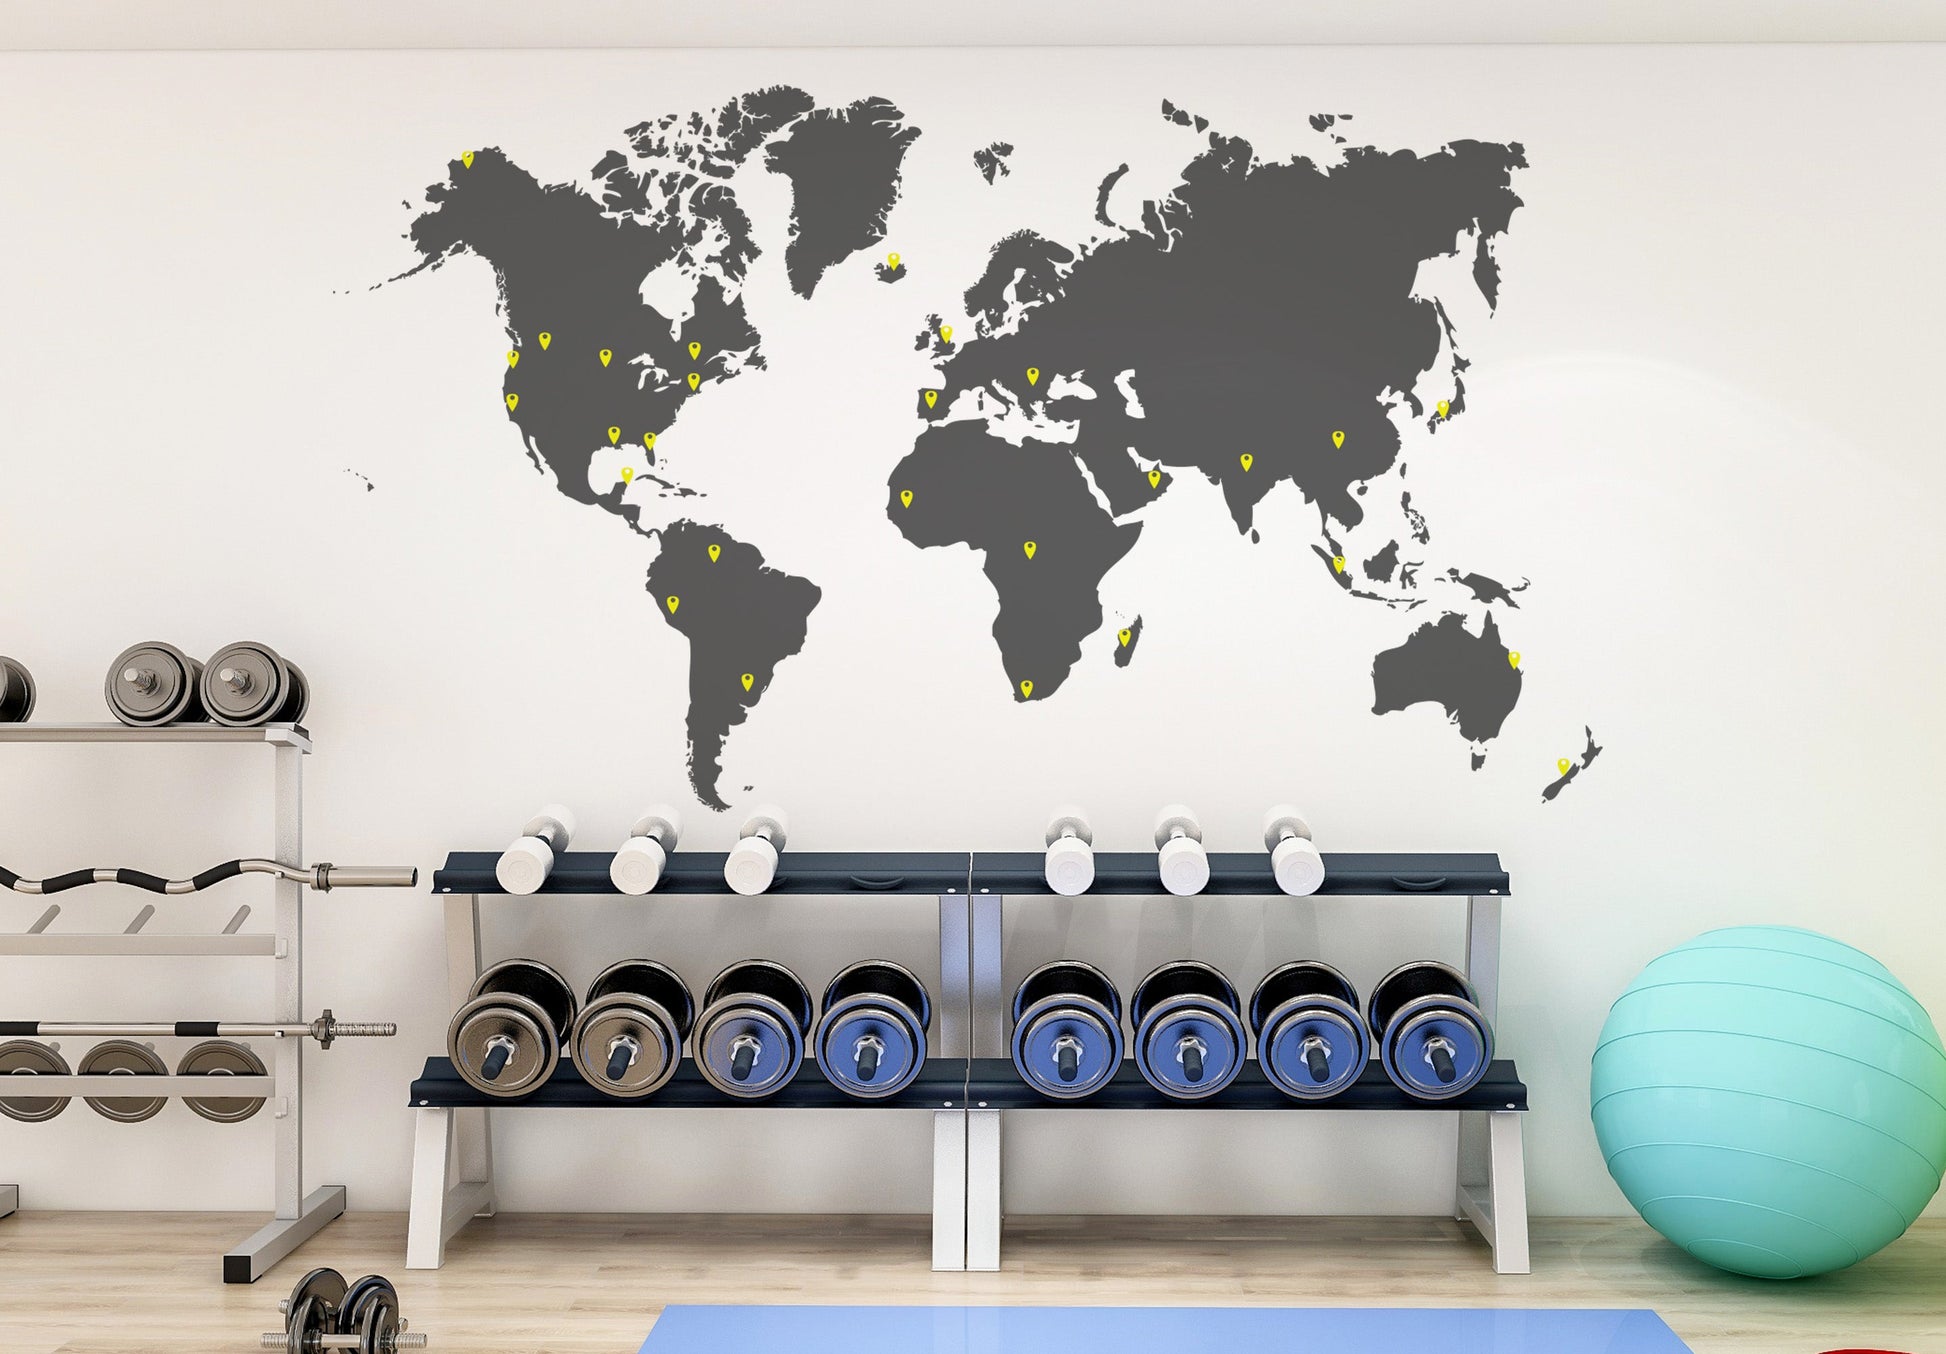 A gym room with a world map on the wall